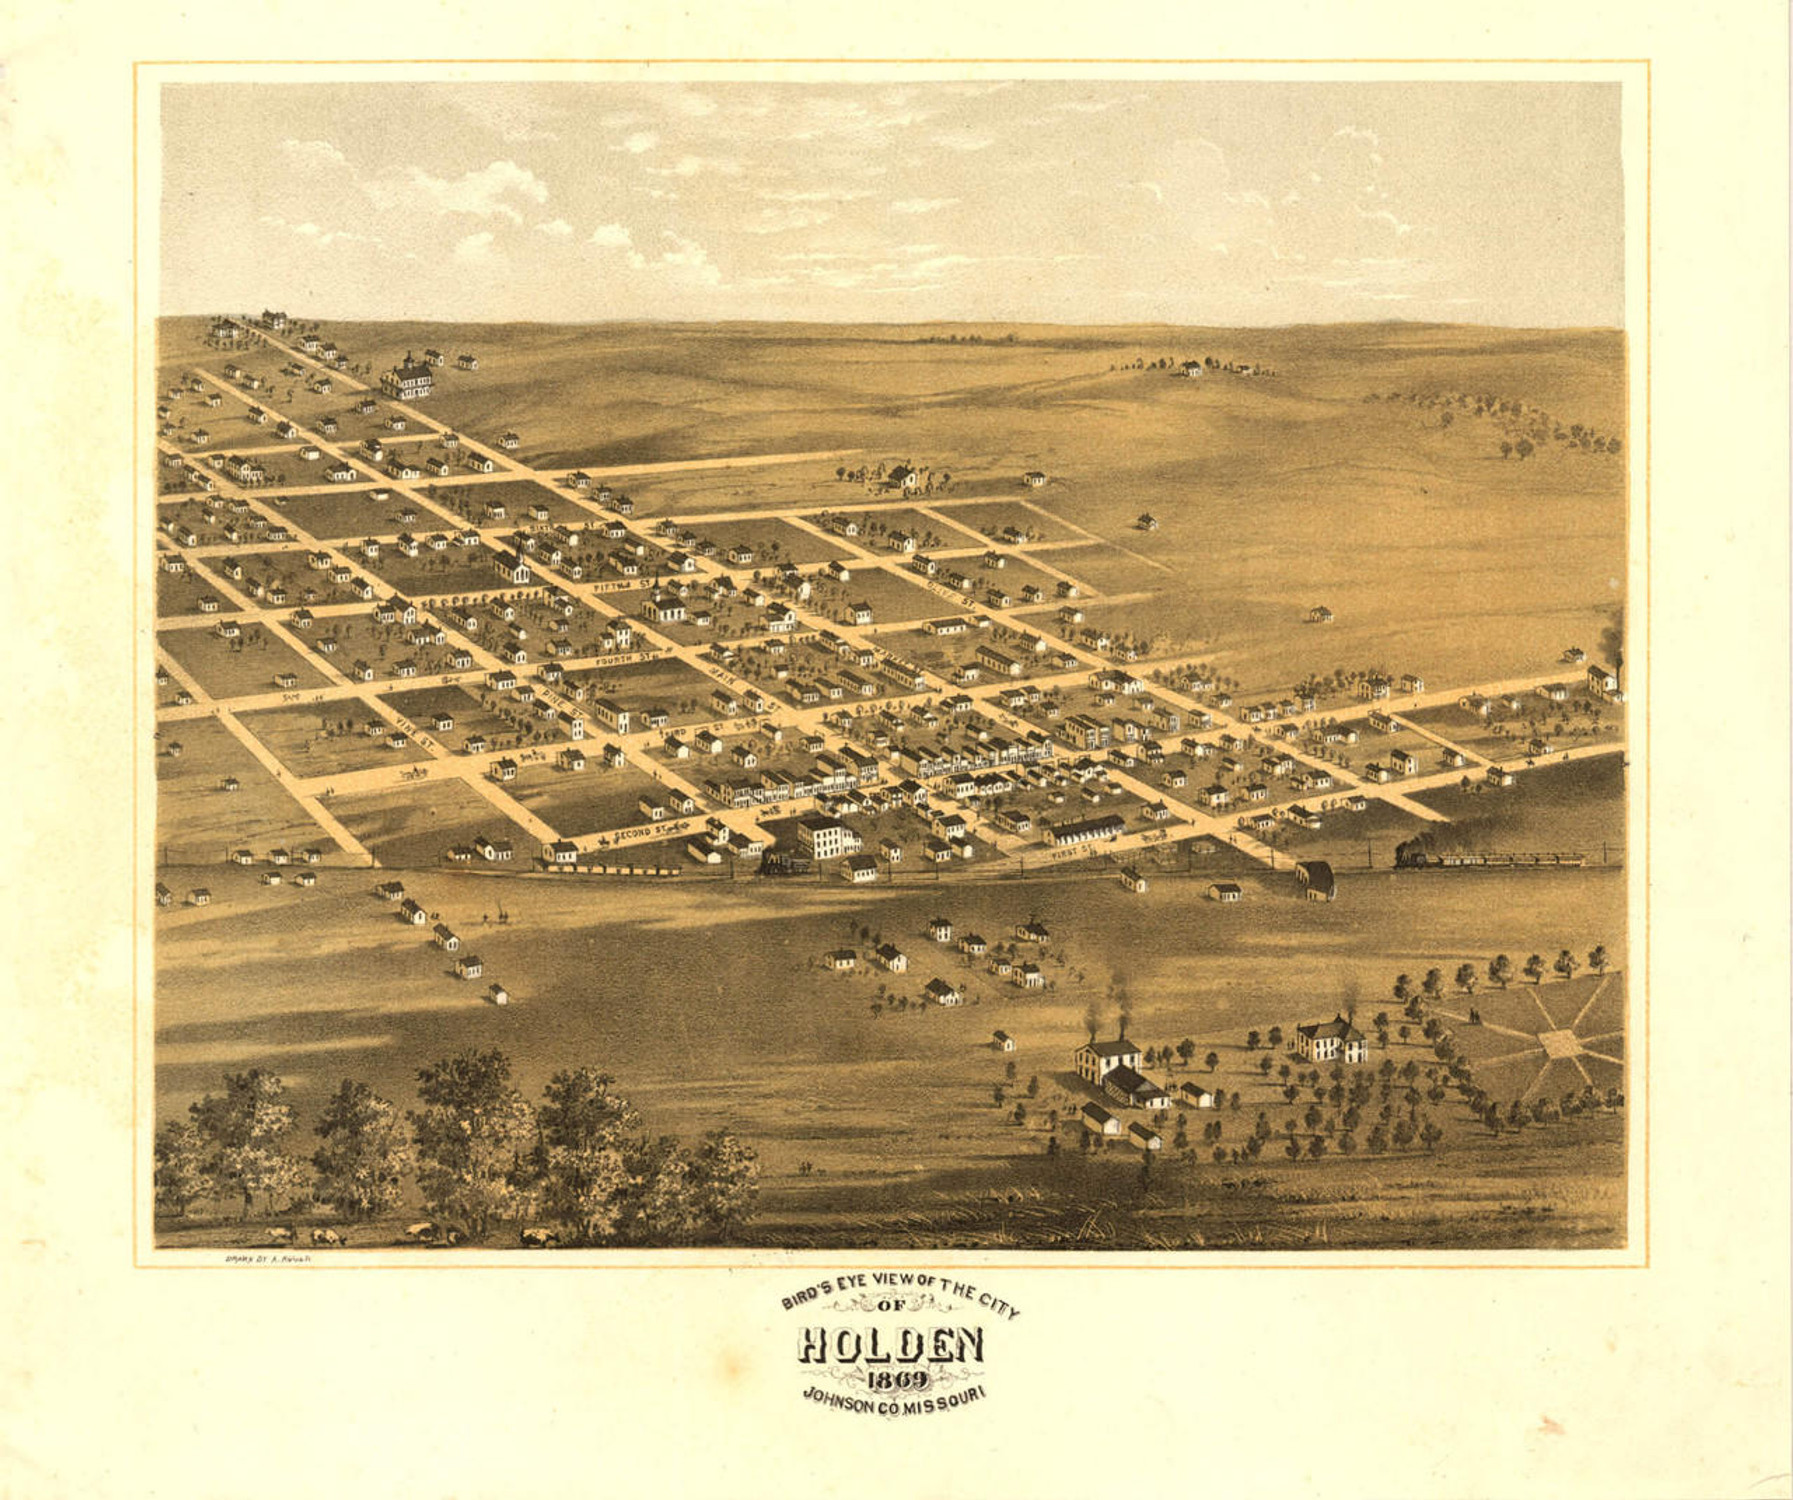 Historic Map - Holden, MO - 1869, image 1, World Maps Online